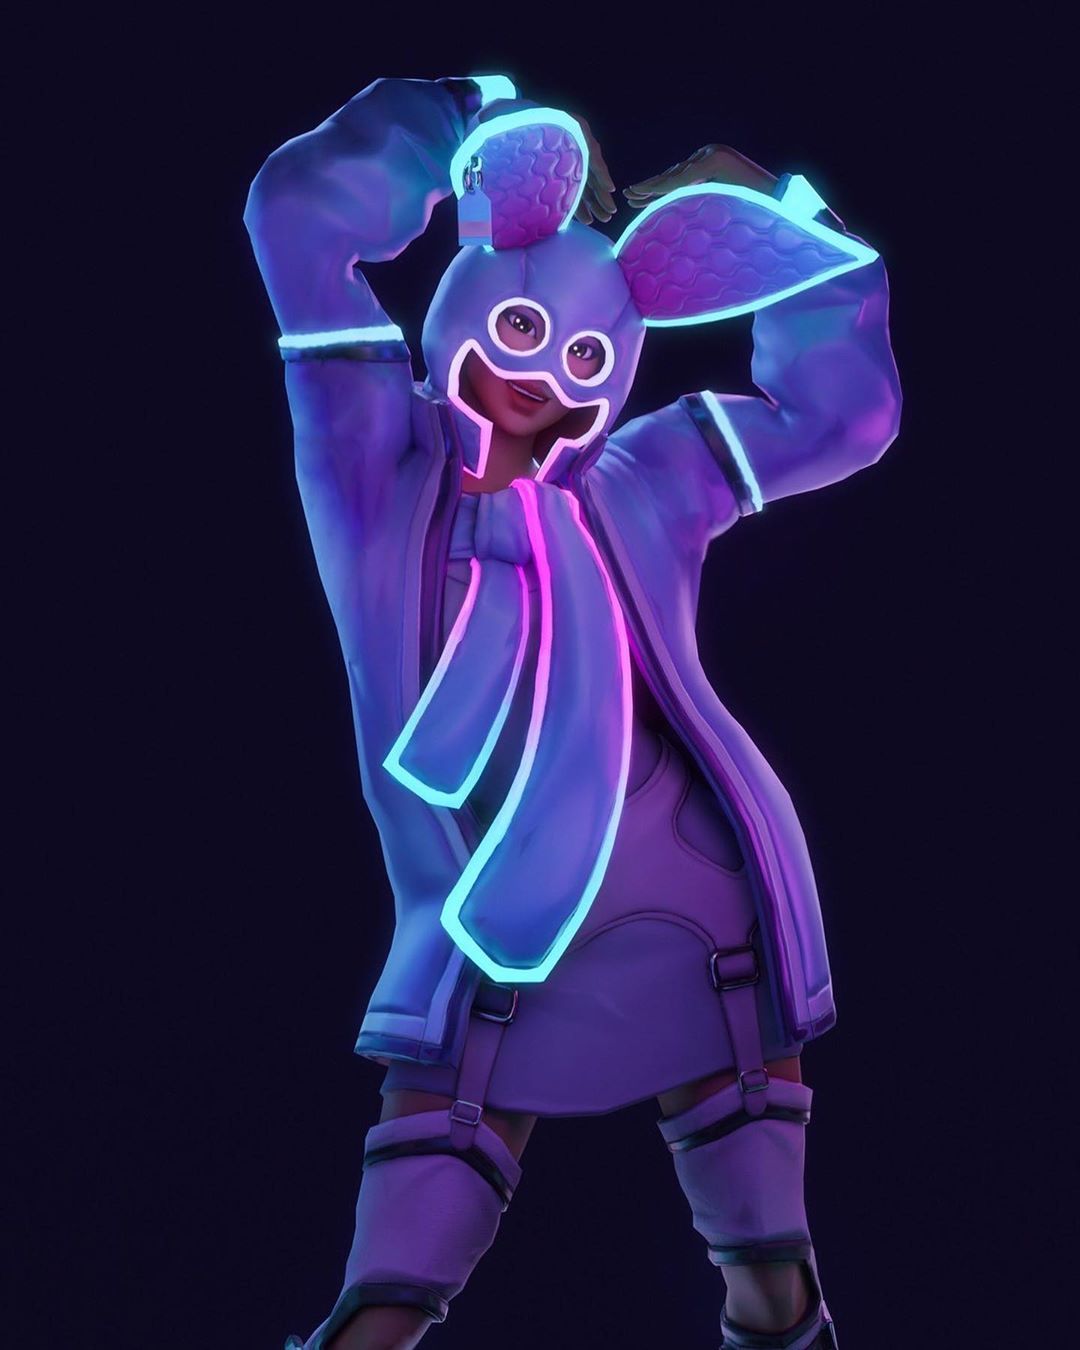 A neon purple and blue outfit on a Fortnite character. - Fortnite